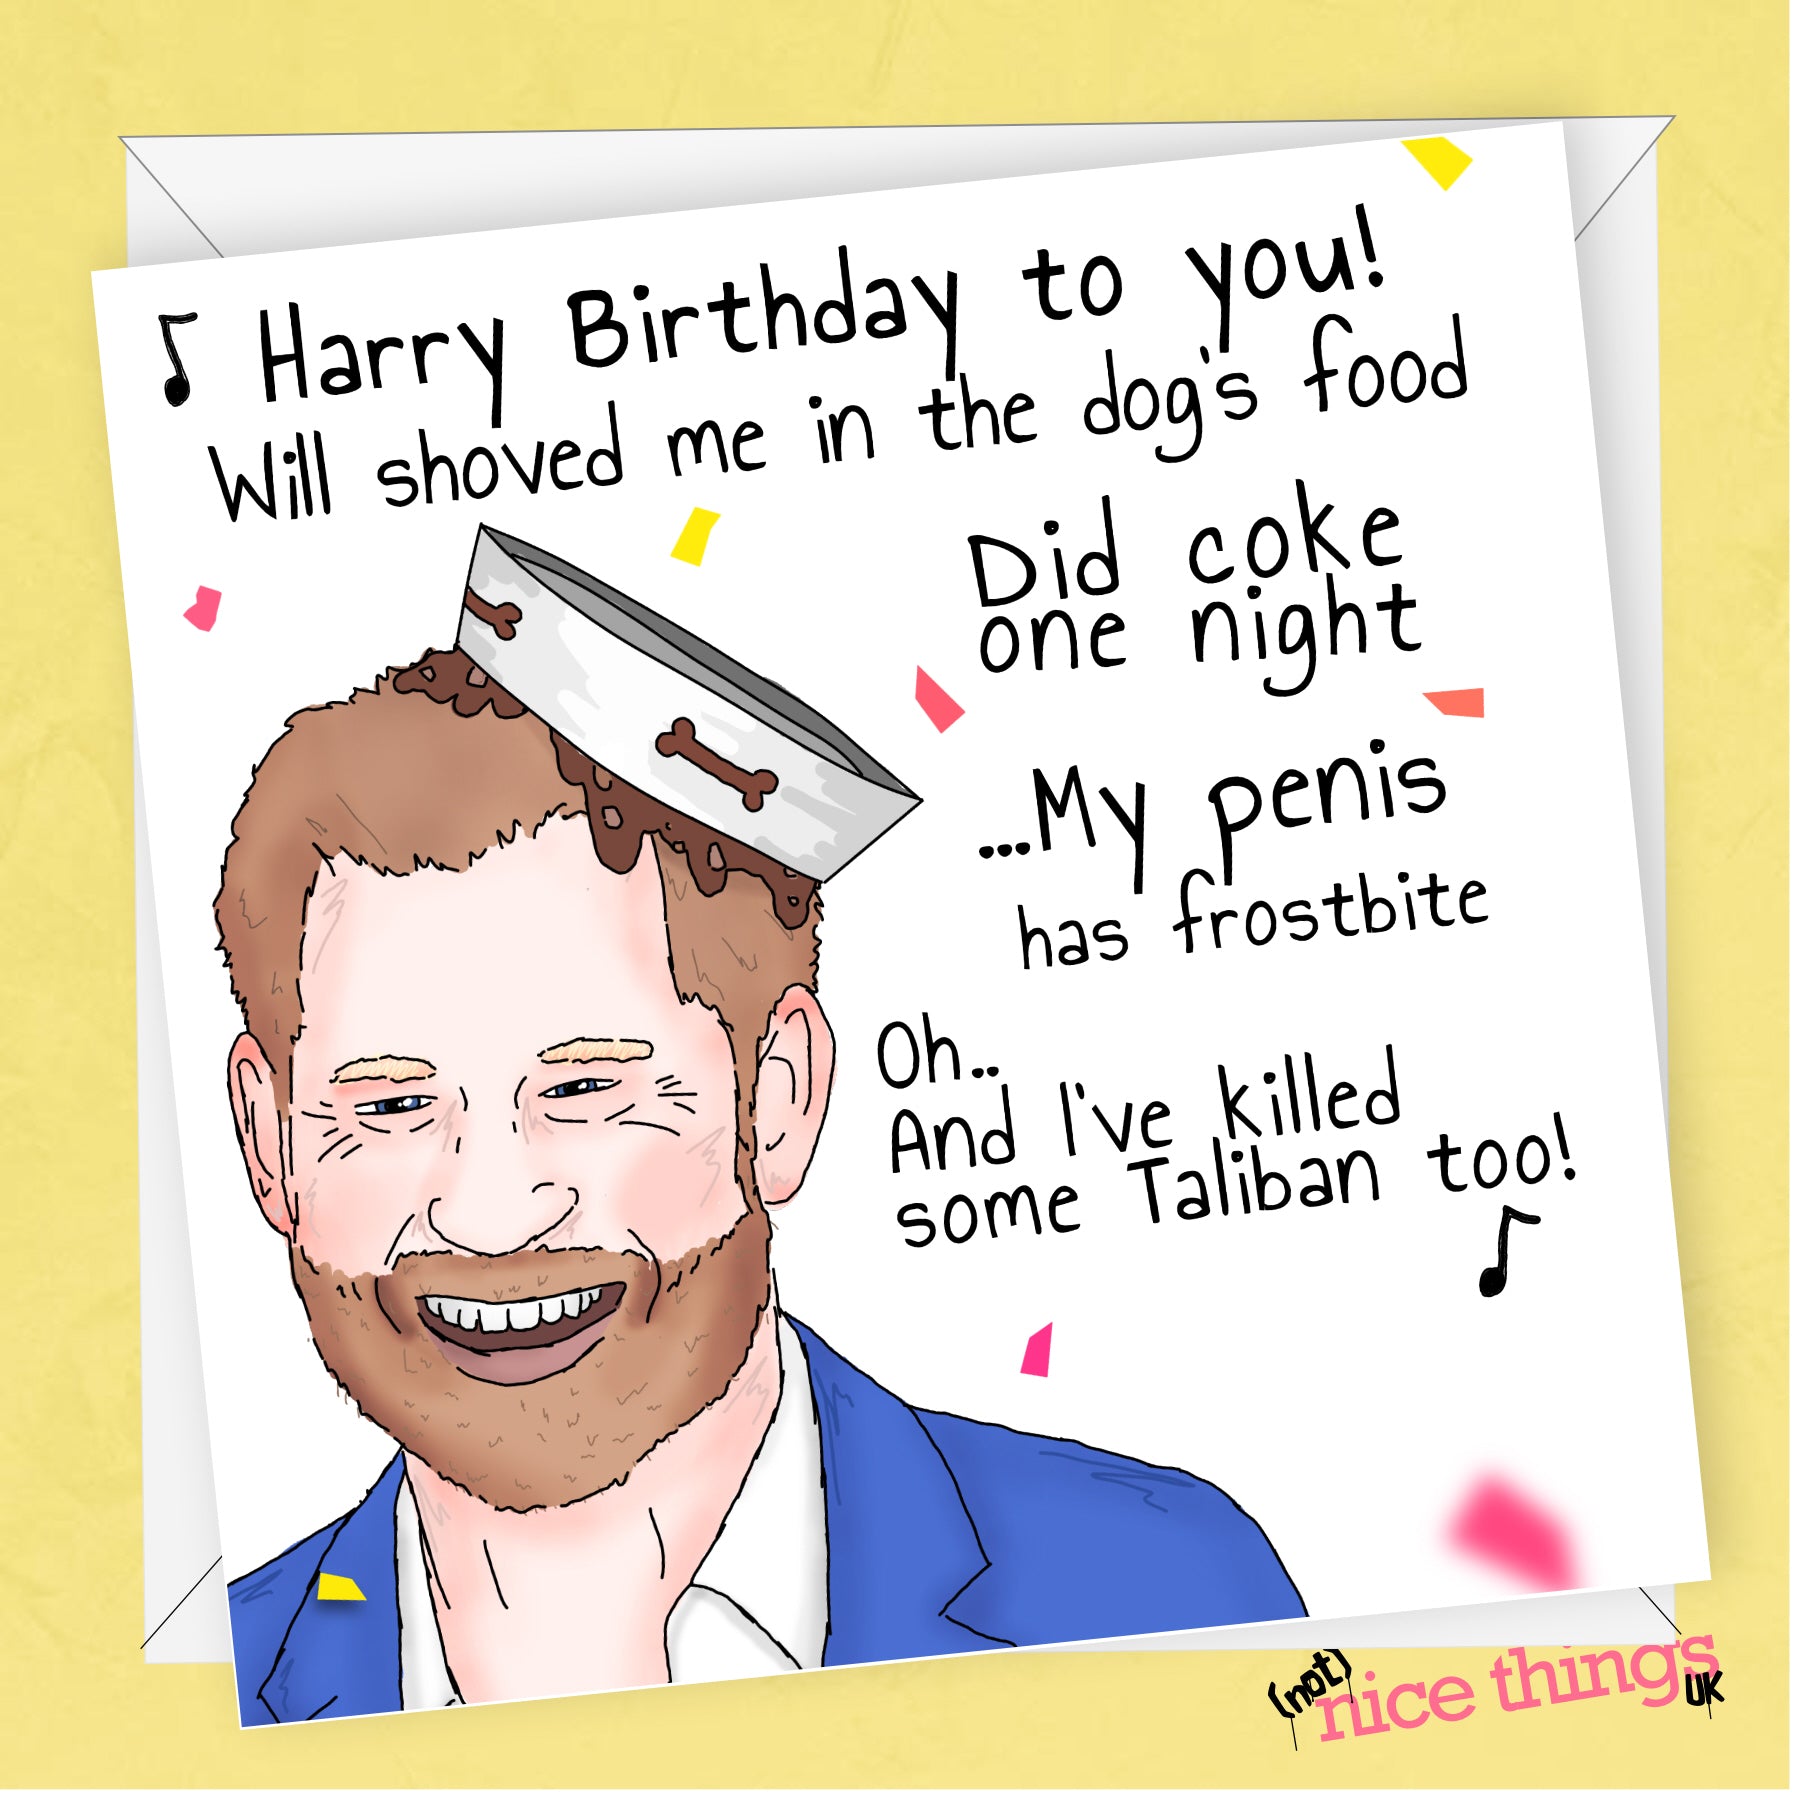 Prince Harry Funny Birthday Card, Royal Family, Funny Card for Dad, For Mum, Him Her, Dog Bowl, Rude Card for Dad, Harry, William, Markle